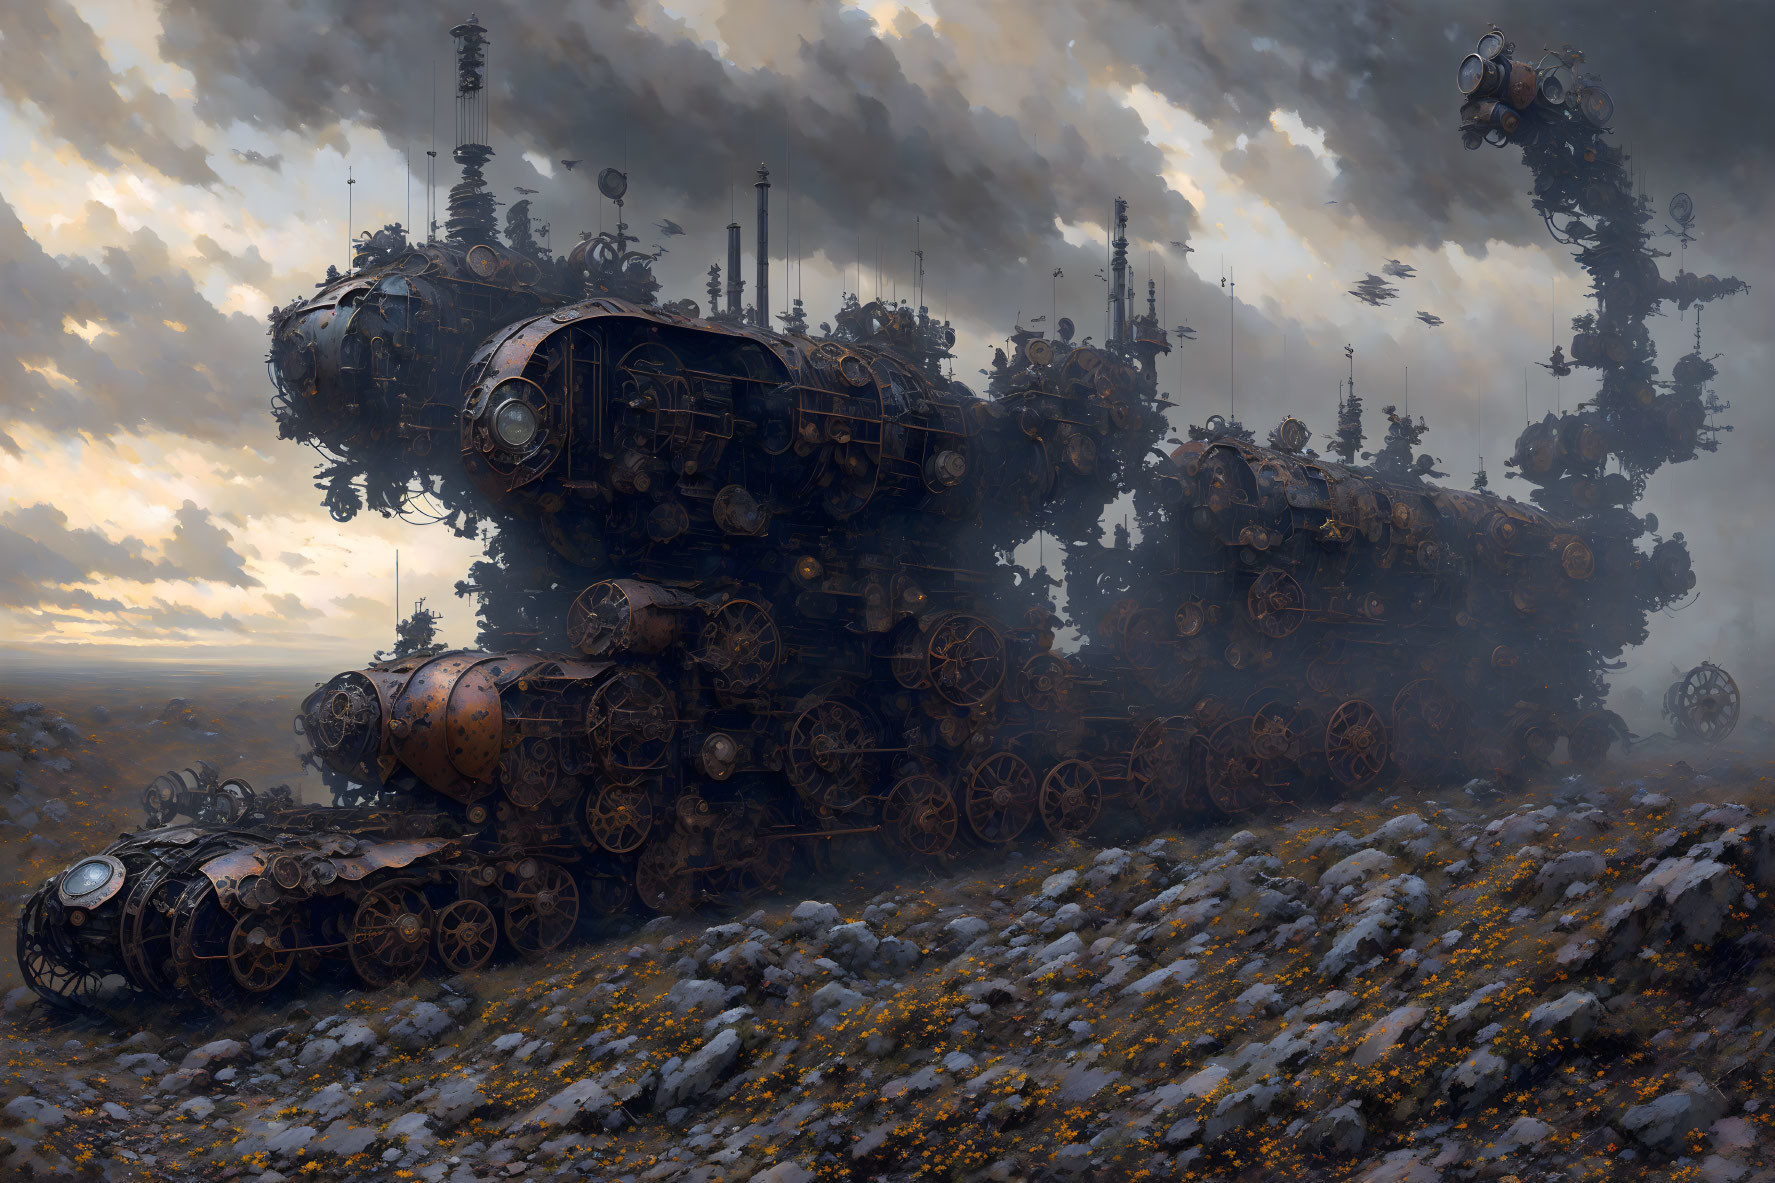 Post-apocalyptic landscape with giant, decaying train-like machines and yellow flowers under a gloomy sky